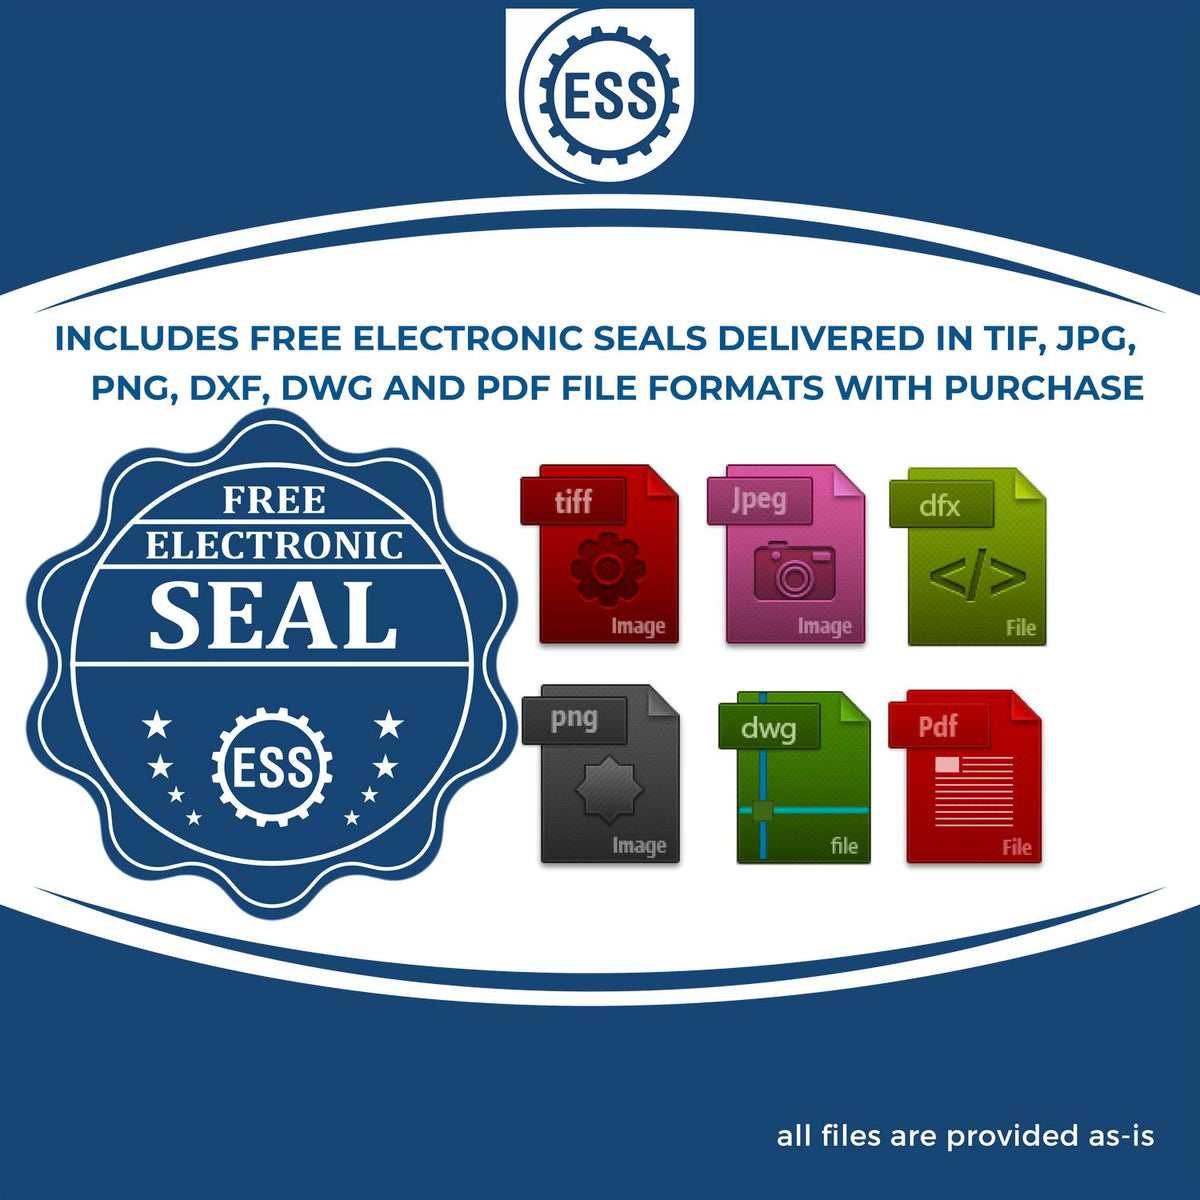 An infographic for the free electronic seal for the Gift Florida Geologist Seal illustrating the different file type icons such as DXF, DWG, TIF, JPG and PNG.